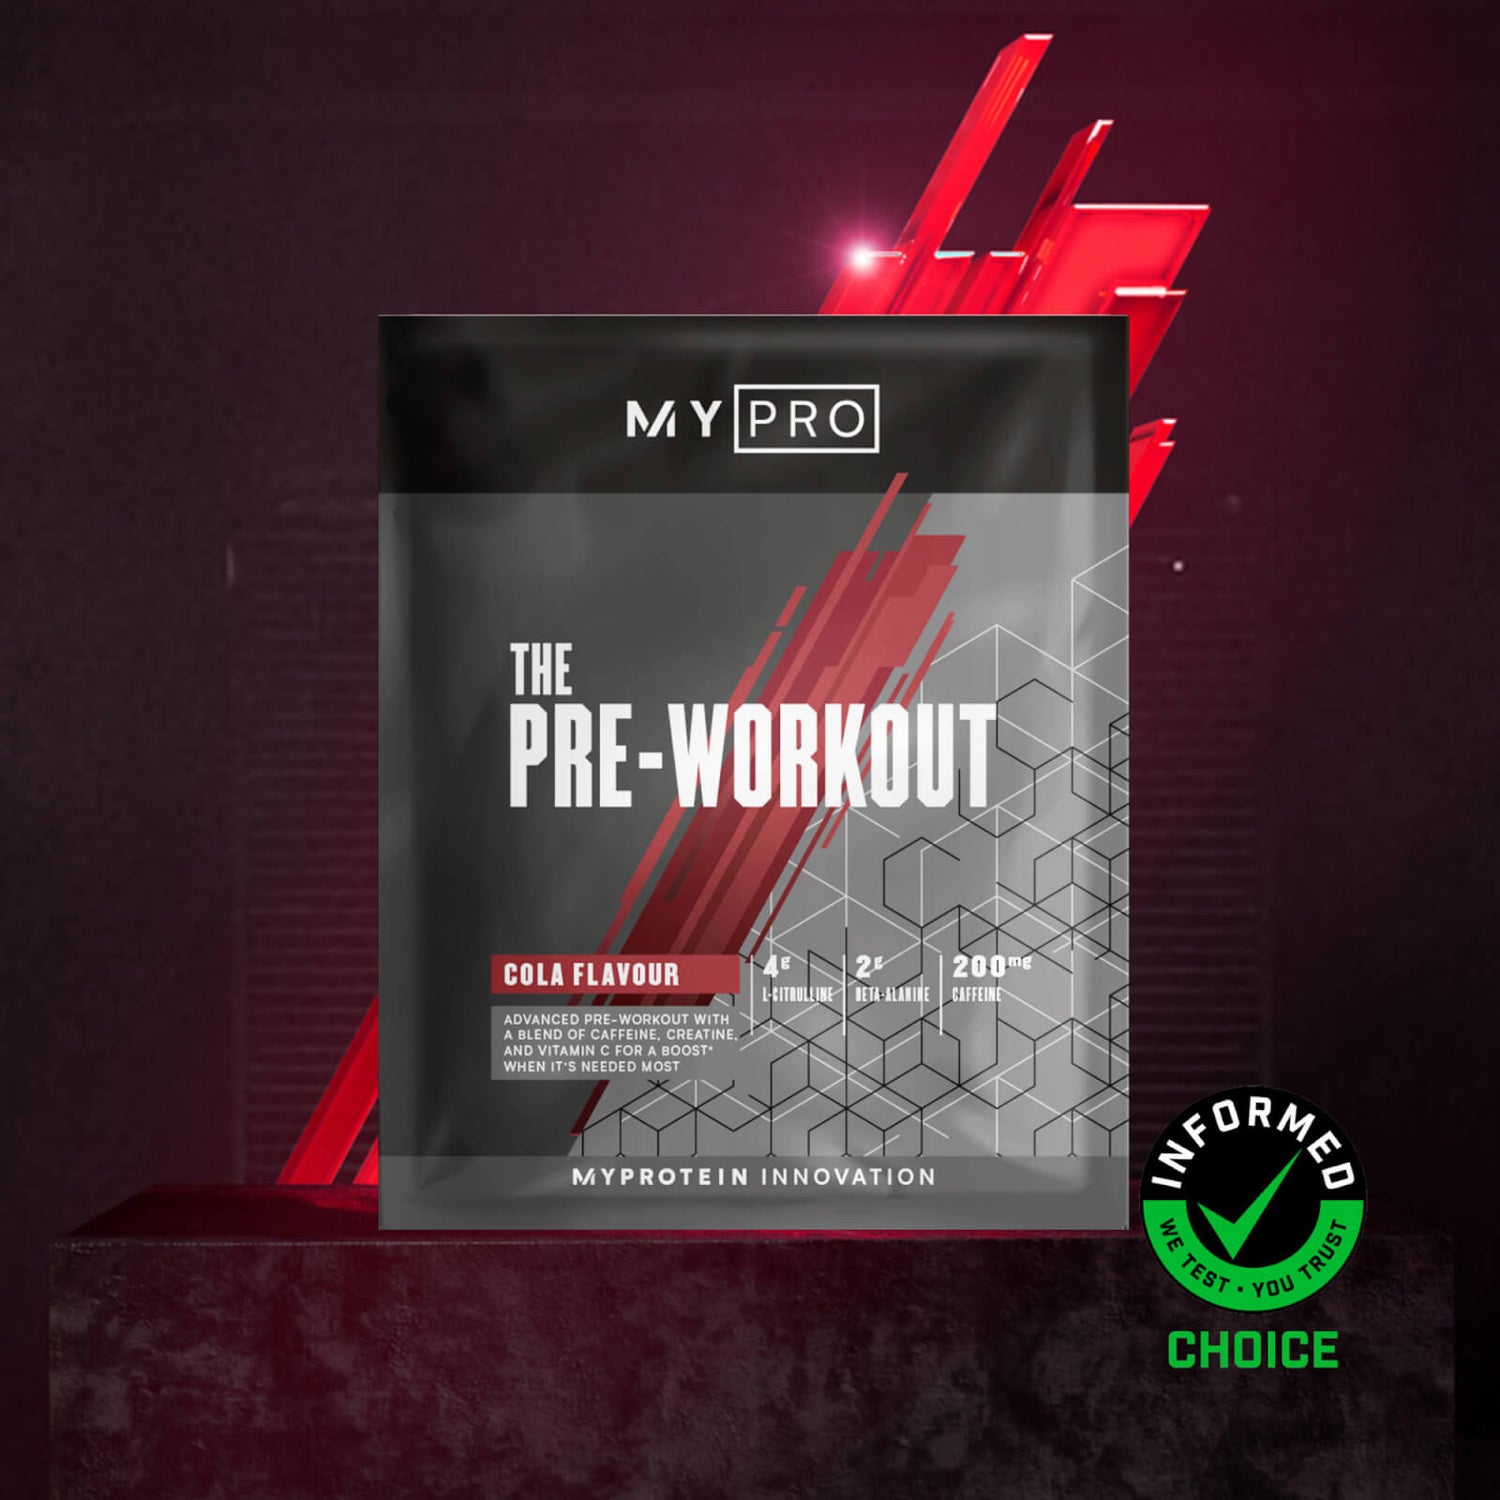 THE Pre-Workout (Sample) - 14g - Cola